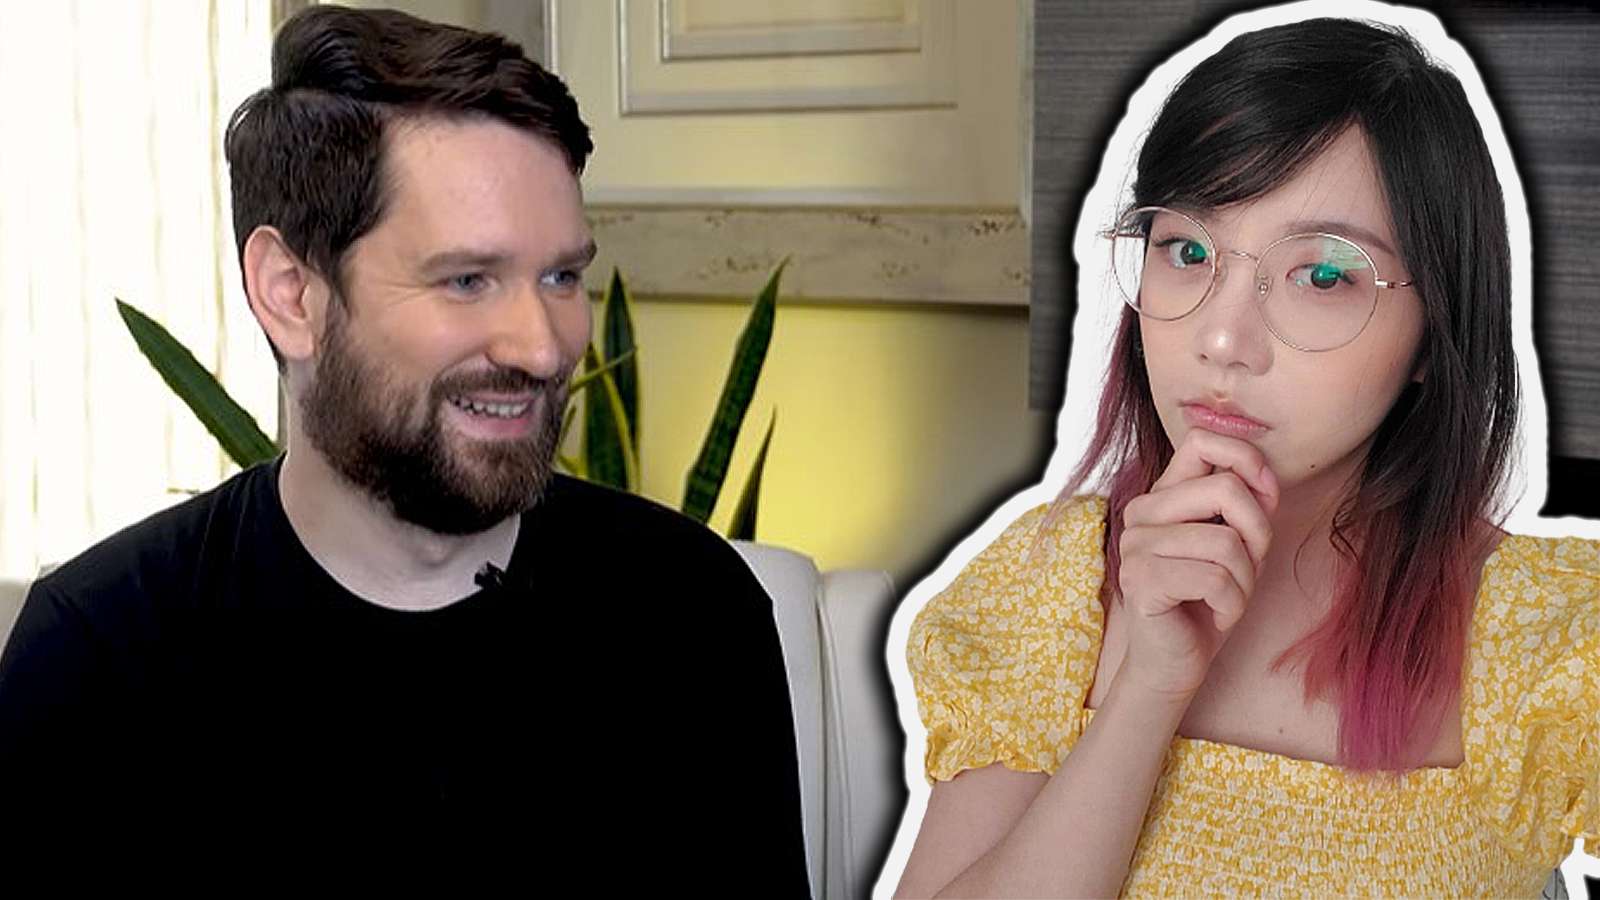 Destiny shares hilarious drunk dms with lilypichu